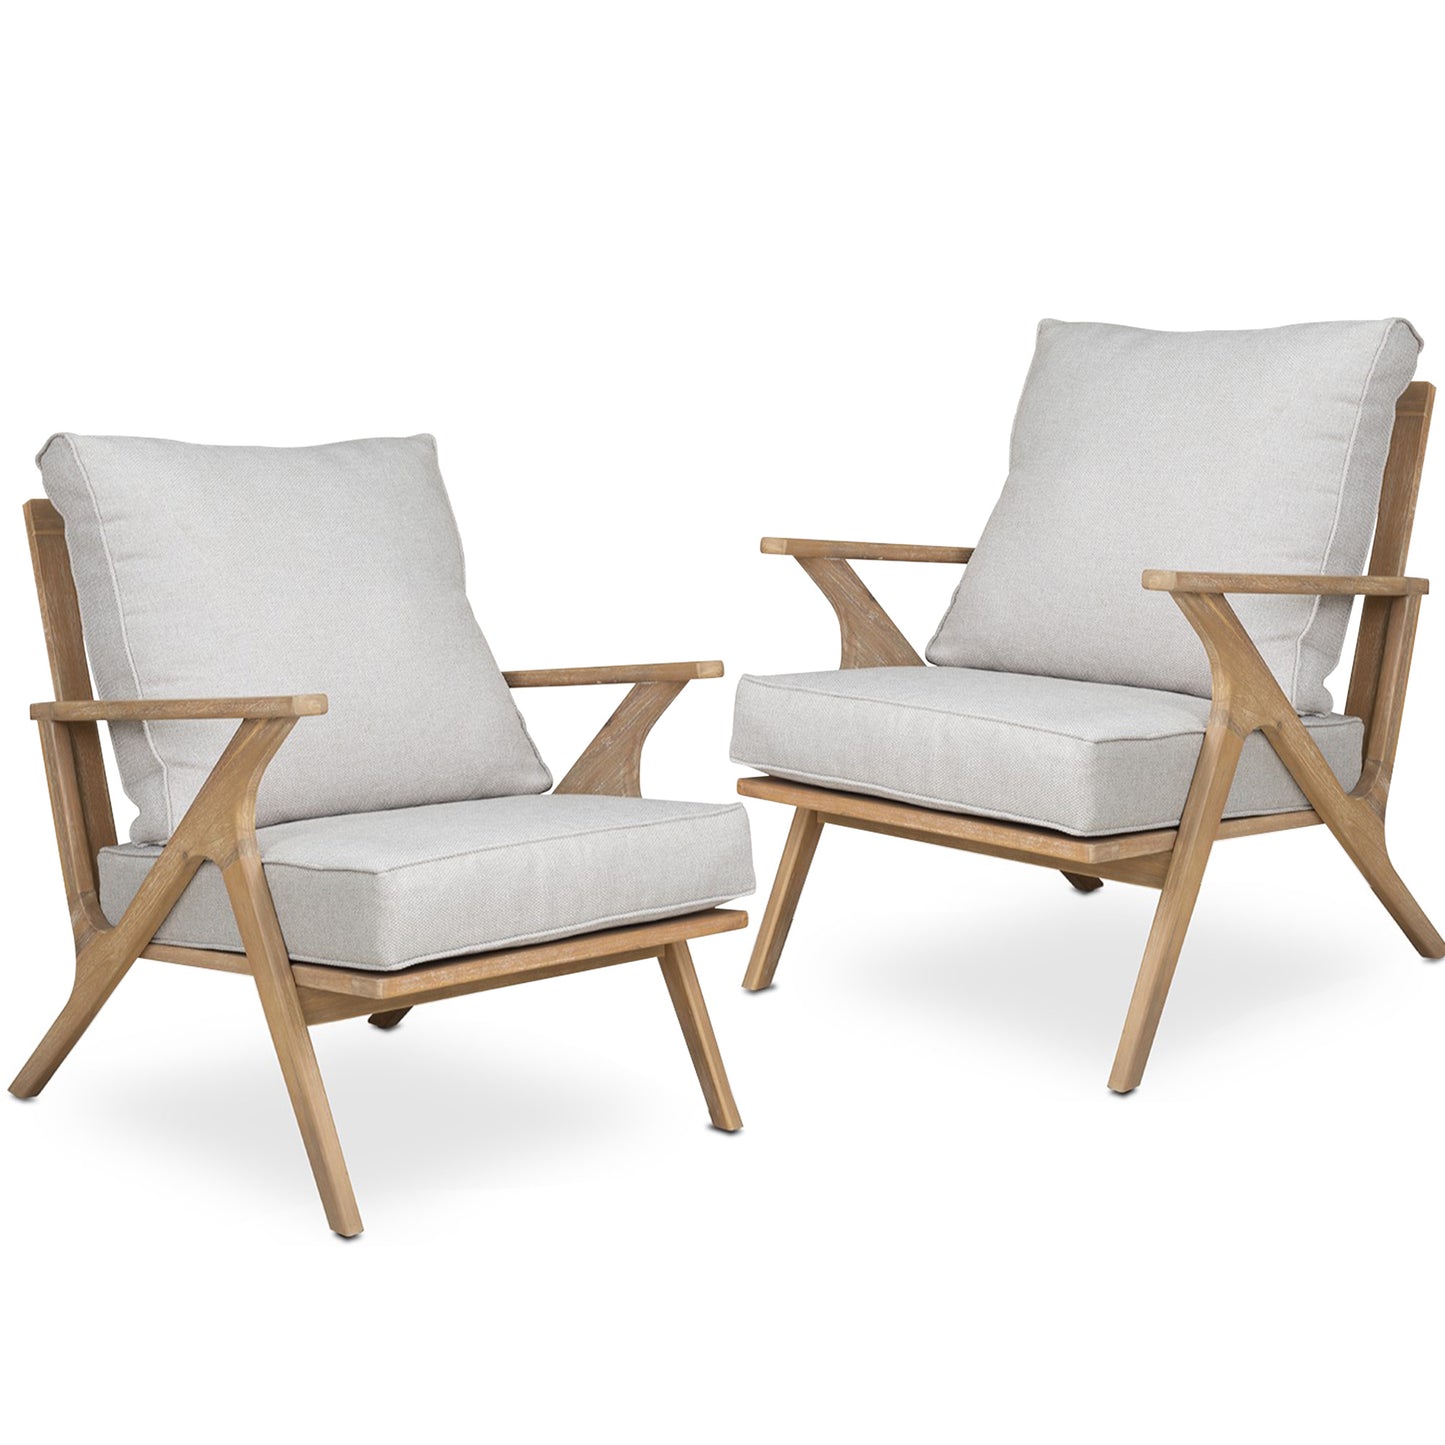 Set of 2 Outdoor Acacia Wood Chair Set with Soft Cushion Seat